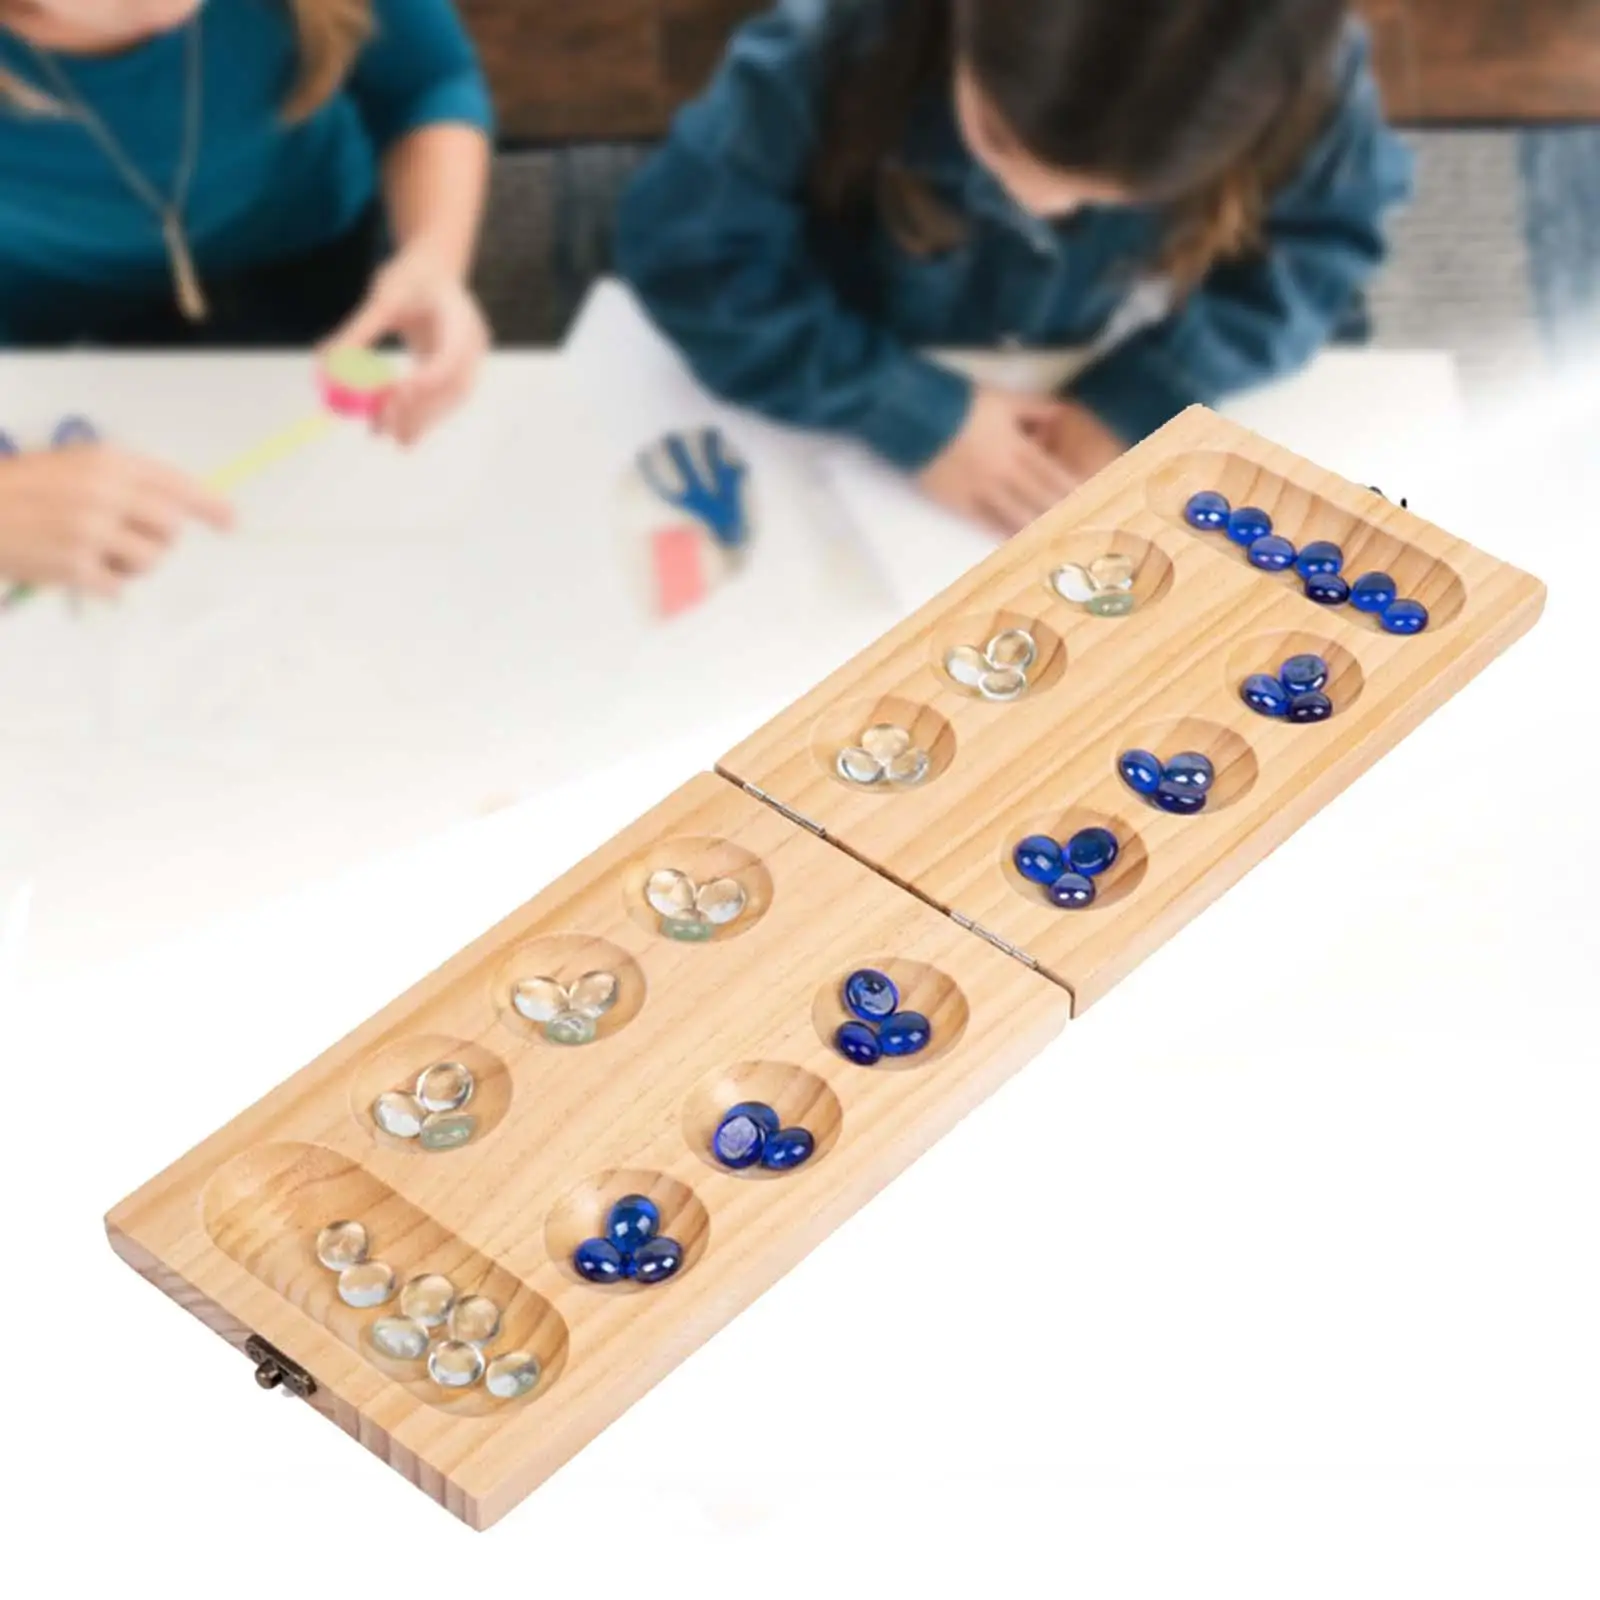 Wood Folding Mancala Board Game Portable Classic 48 Beads Set for Travel Adult Kids Ages 7+ Party Entertainment